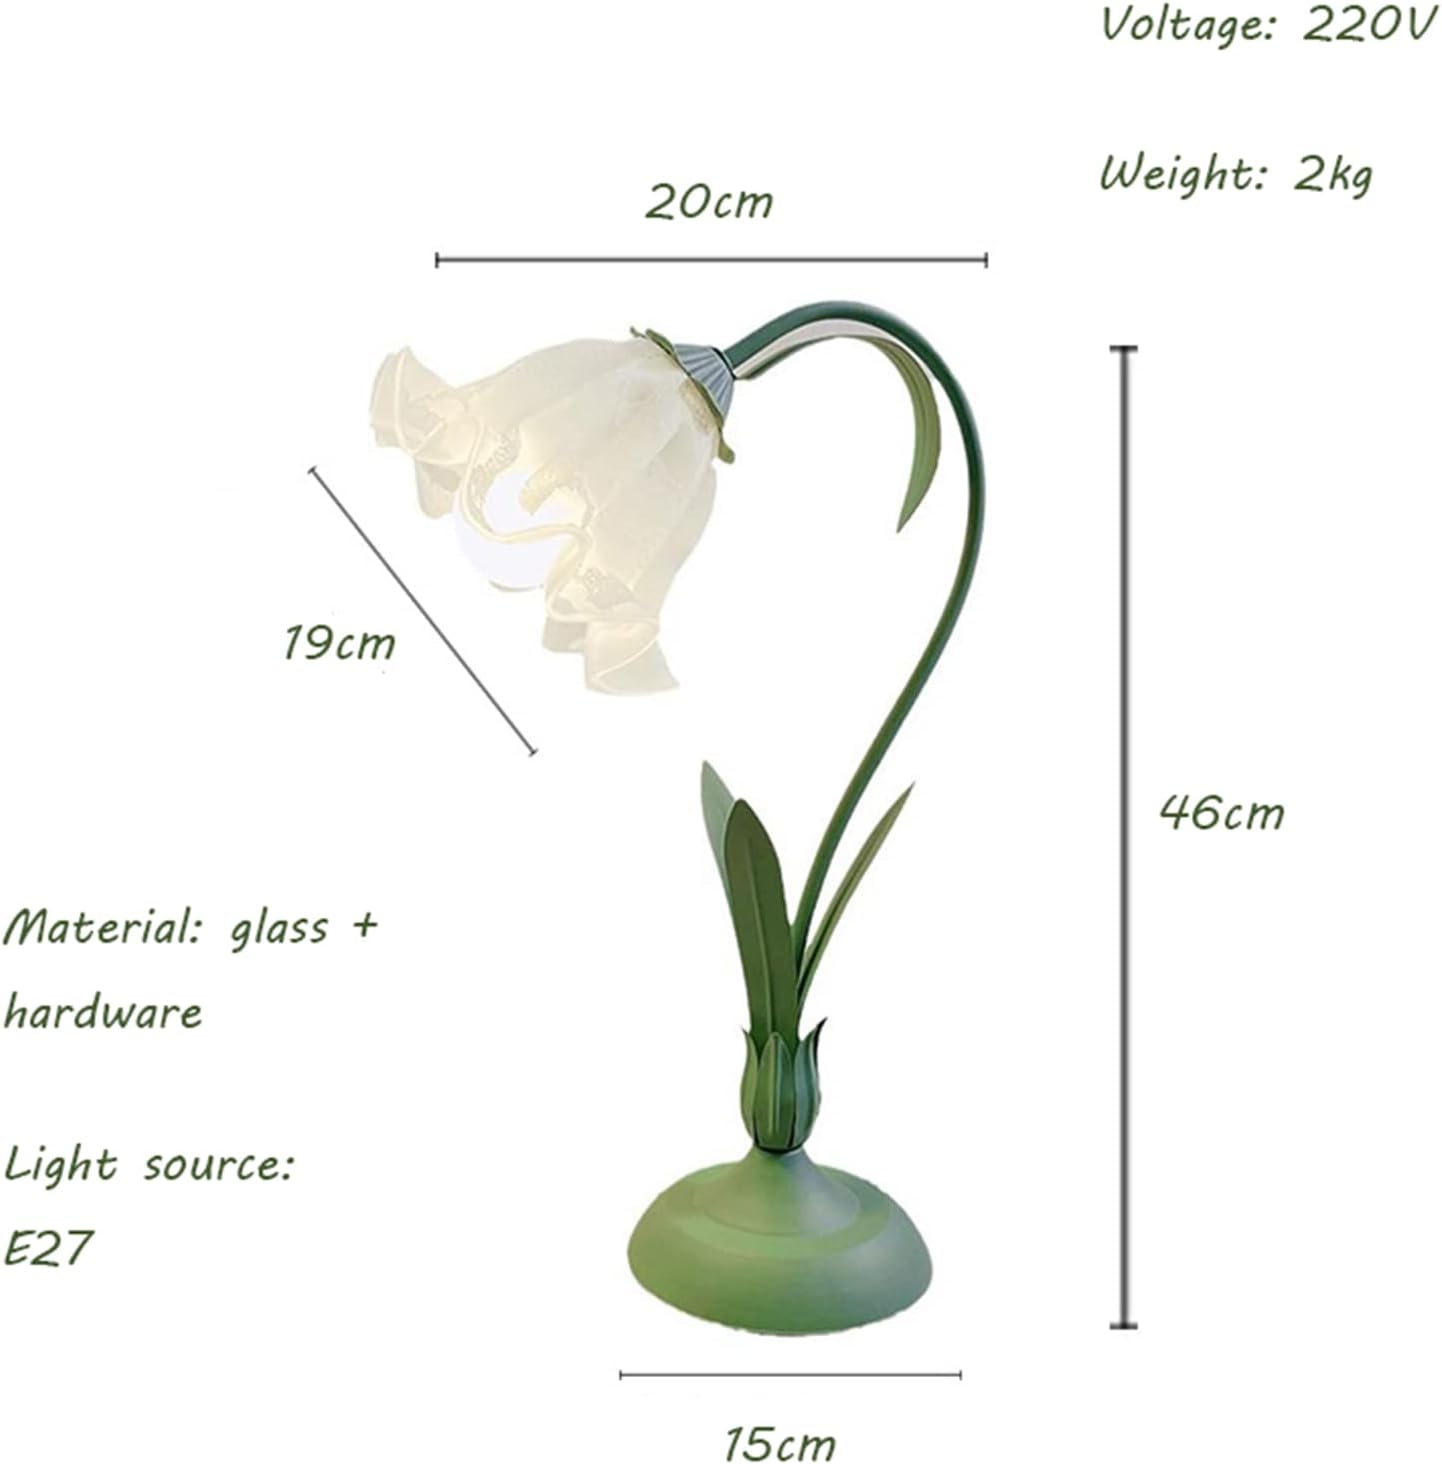 Minimalistic Flower Lamp Control with Switch - Buy Minimalistic Flower Lamp Control with Switch in Dubai - HOCC Dubai - Baby playground outdoor - Shop baby product - Shop Pet product - shop home decor and lighting in Dubai - HOCC Dubai - Baby playground o